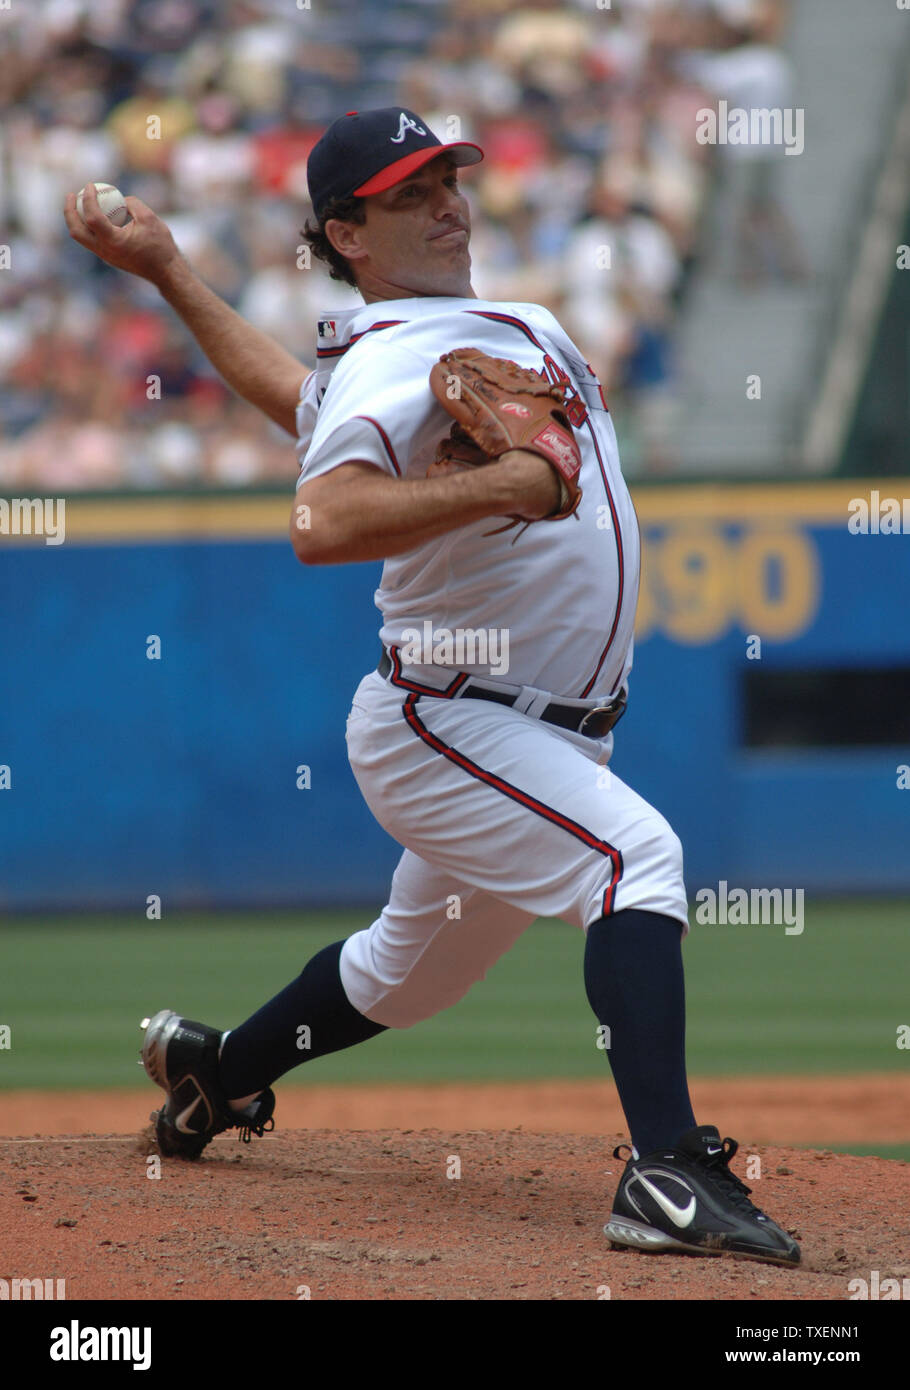 Atlanta Braves relief pitcher Mike Remlinger throws against the Boston Red Sox in the fifth inning June 17, 2006, in Atlanta's Turner Field.  The Red Sox defeated the Braves 5-3 (UPI Photo/John Dickerson) Stock Photo